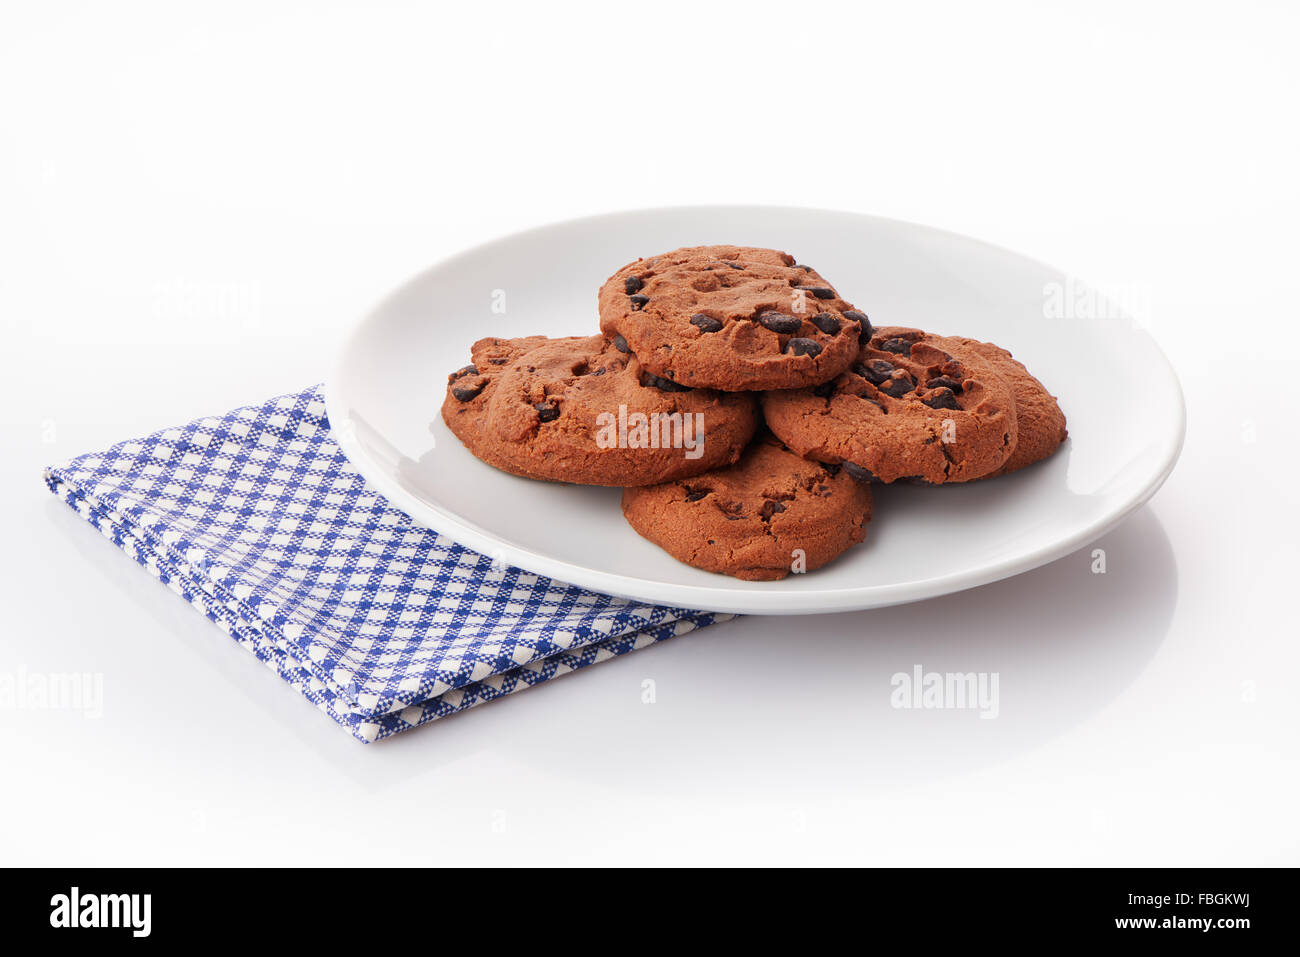 Pile of homemade chocolate chip cookies on white ceramic plate on blue napkin, isolated on white background Stock Photo